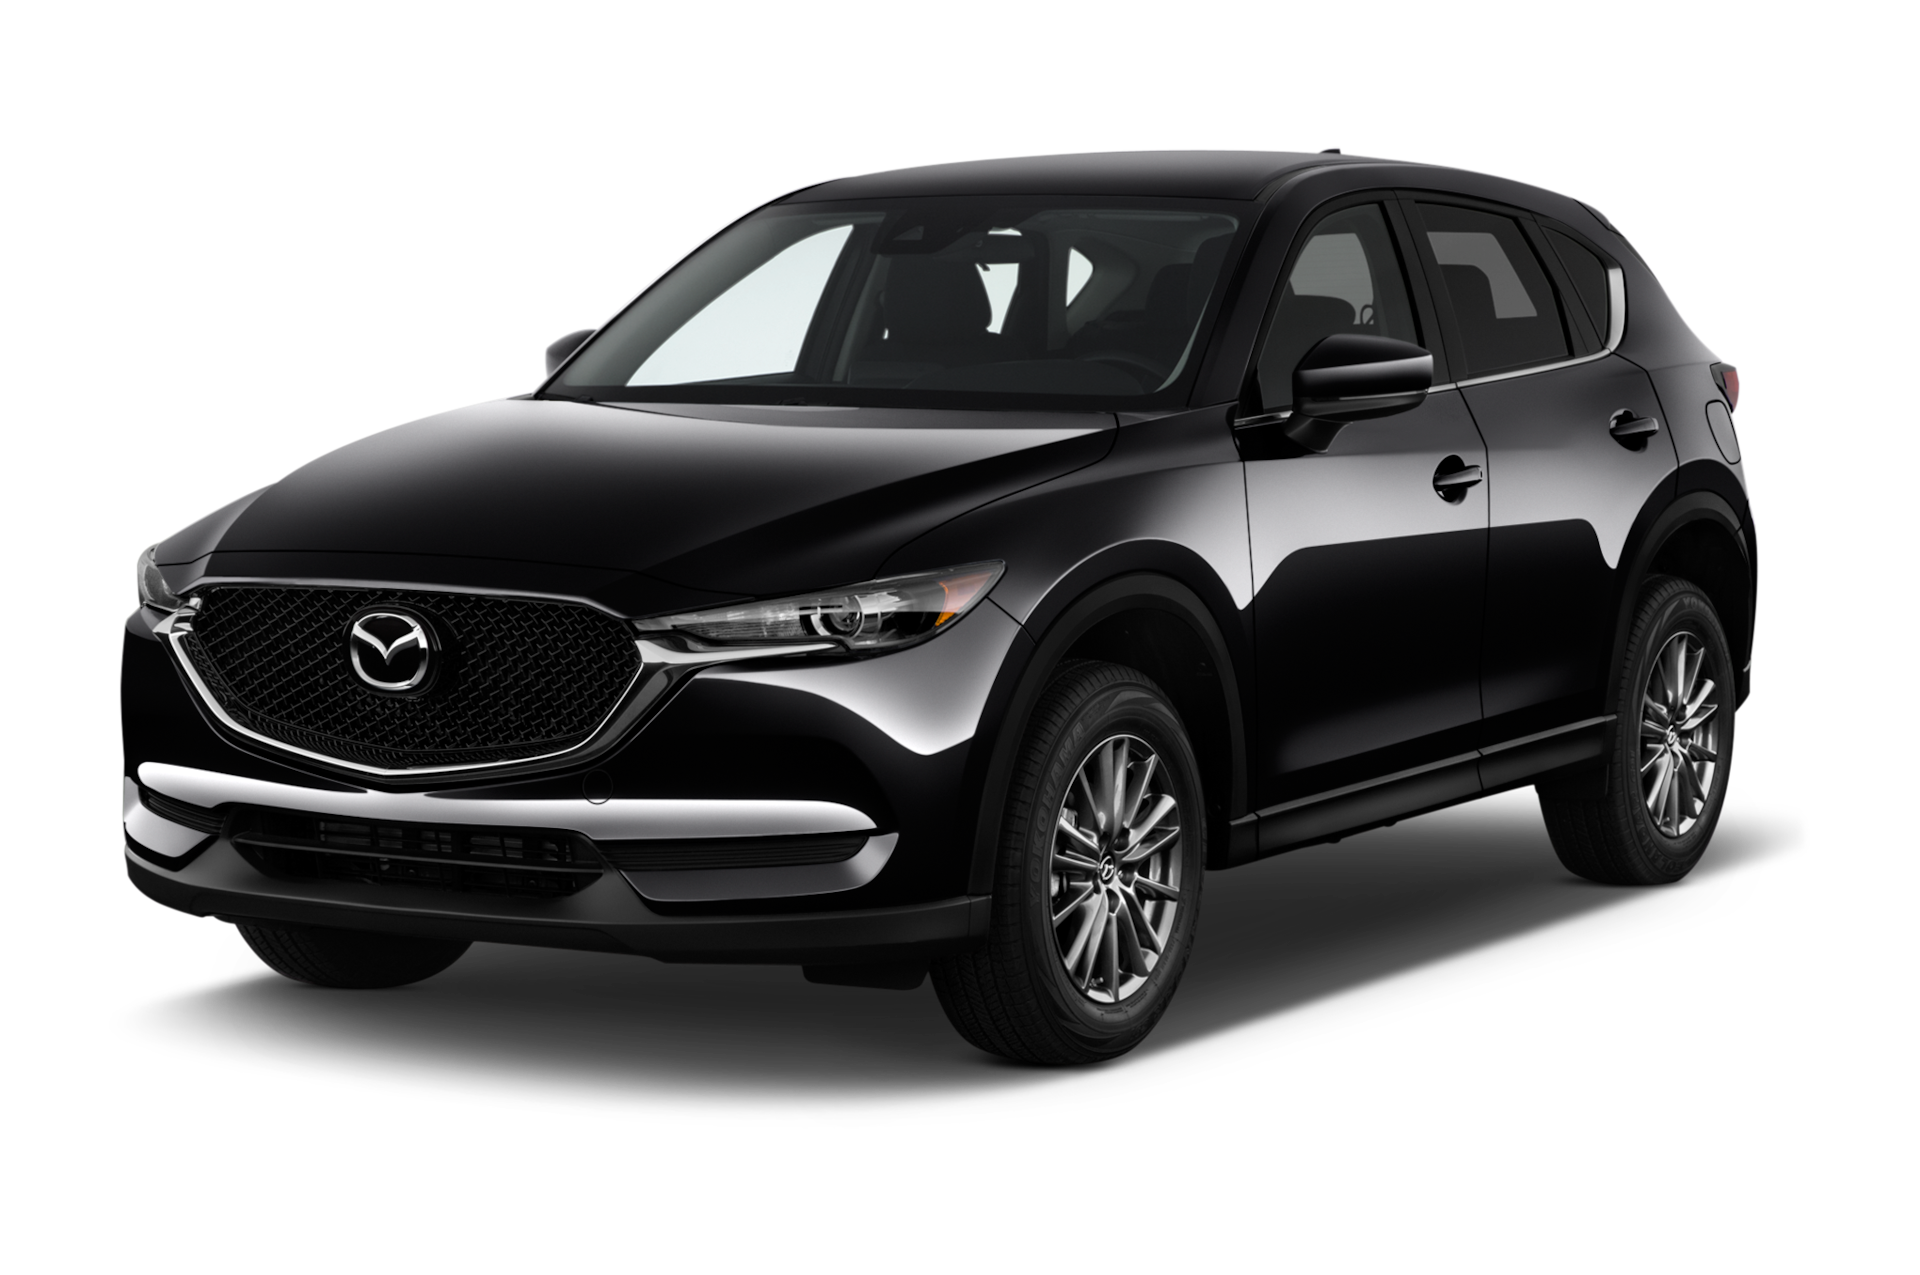 2019 Mazda CX-5 Prices, Reviews, and Photos - MotorTrend